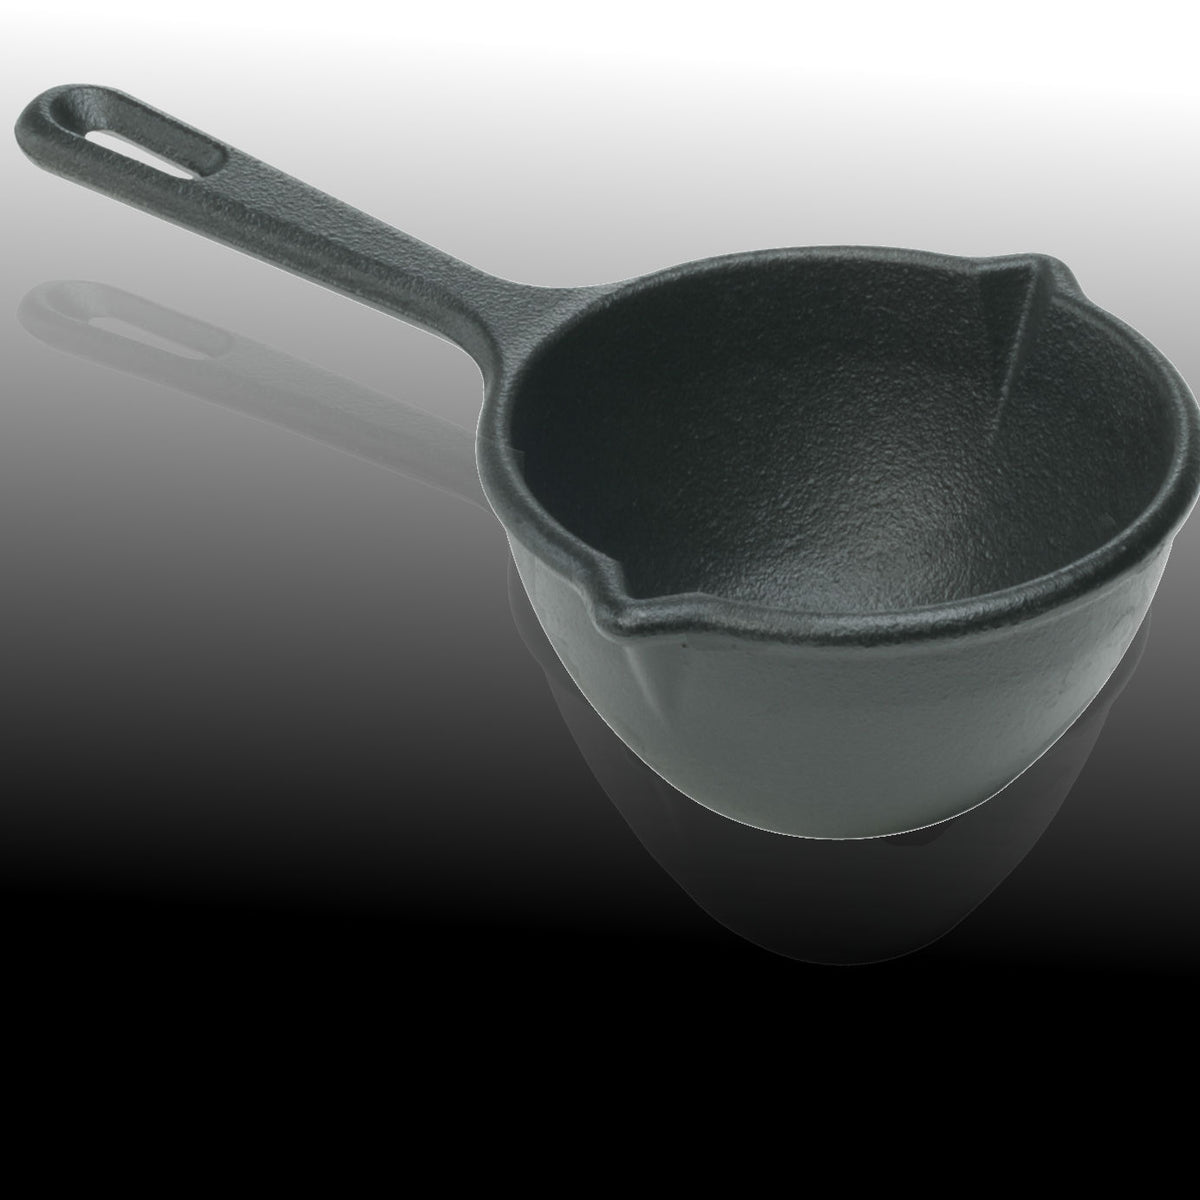 buy cookware accessories at cheap rate in bulk. wholesale & retail bulk kitchen supplies store.